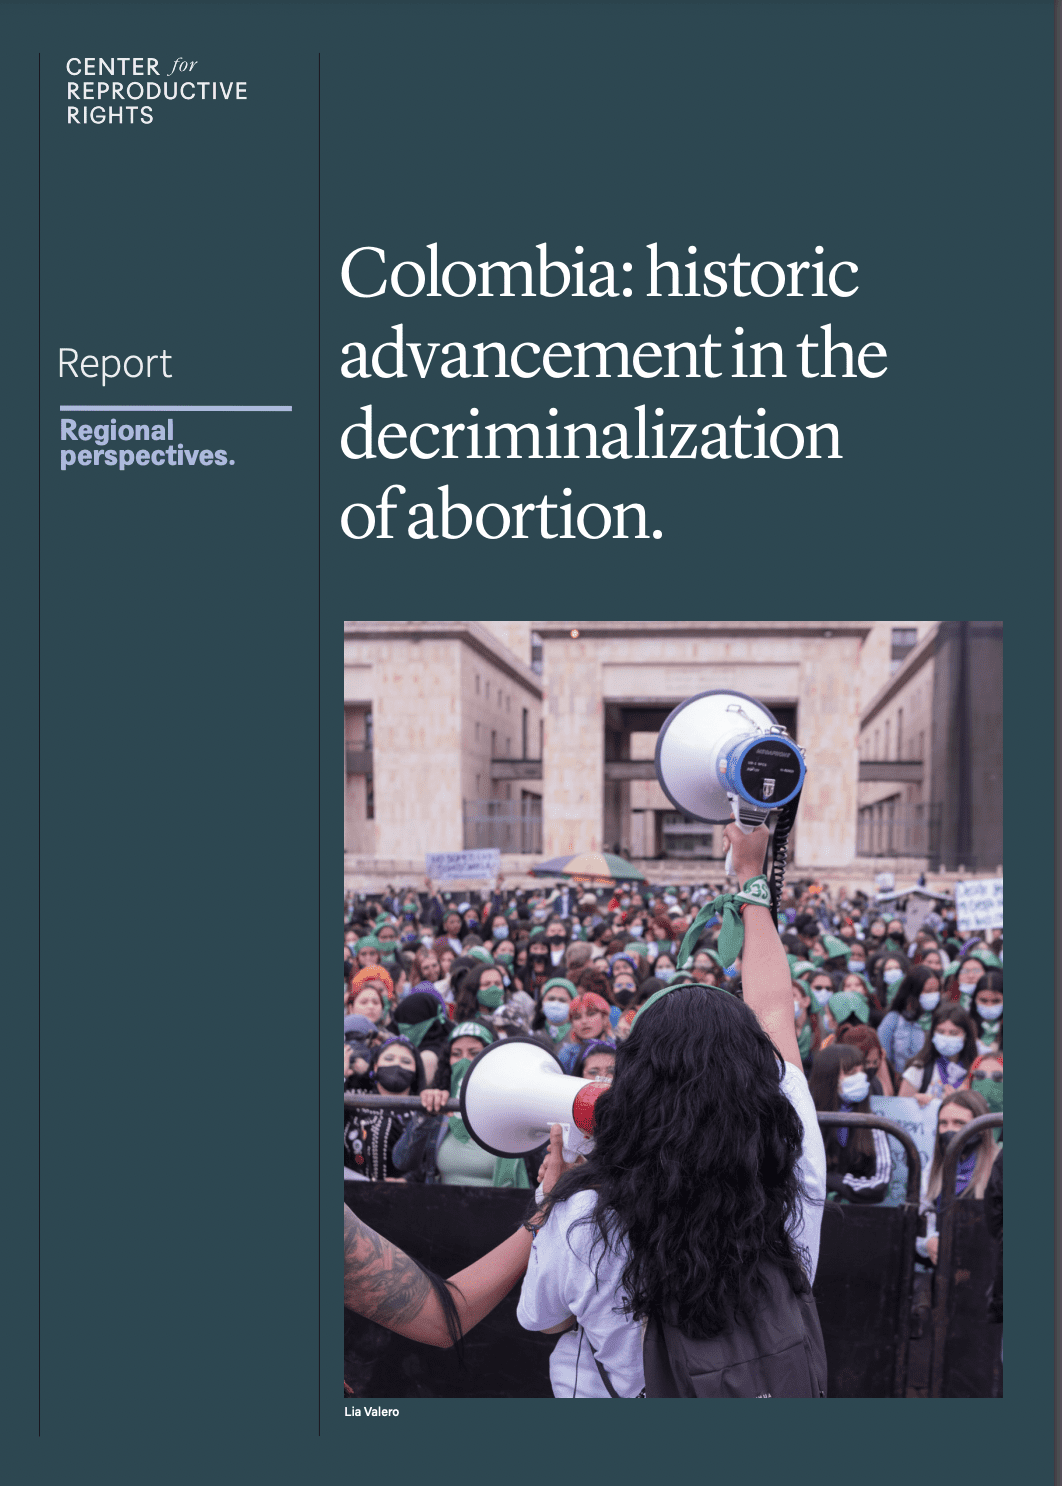 Fact sheet: Colombia's historic advancement in the decriminalization of abortion 